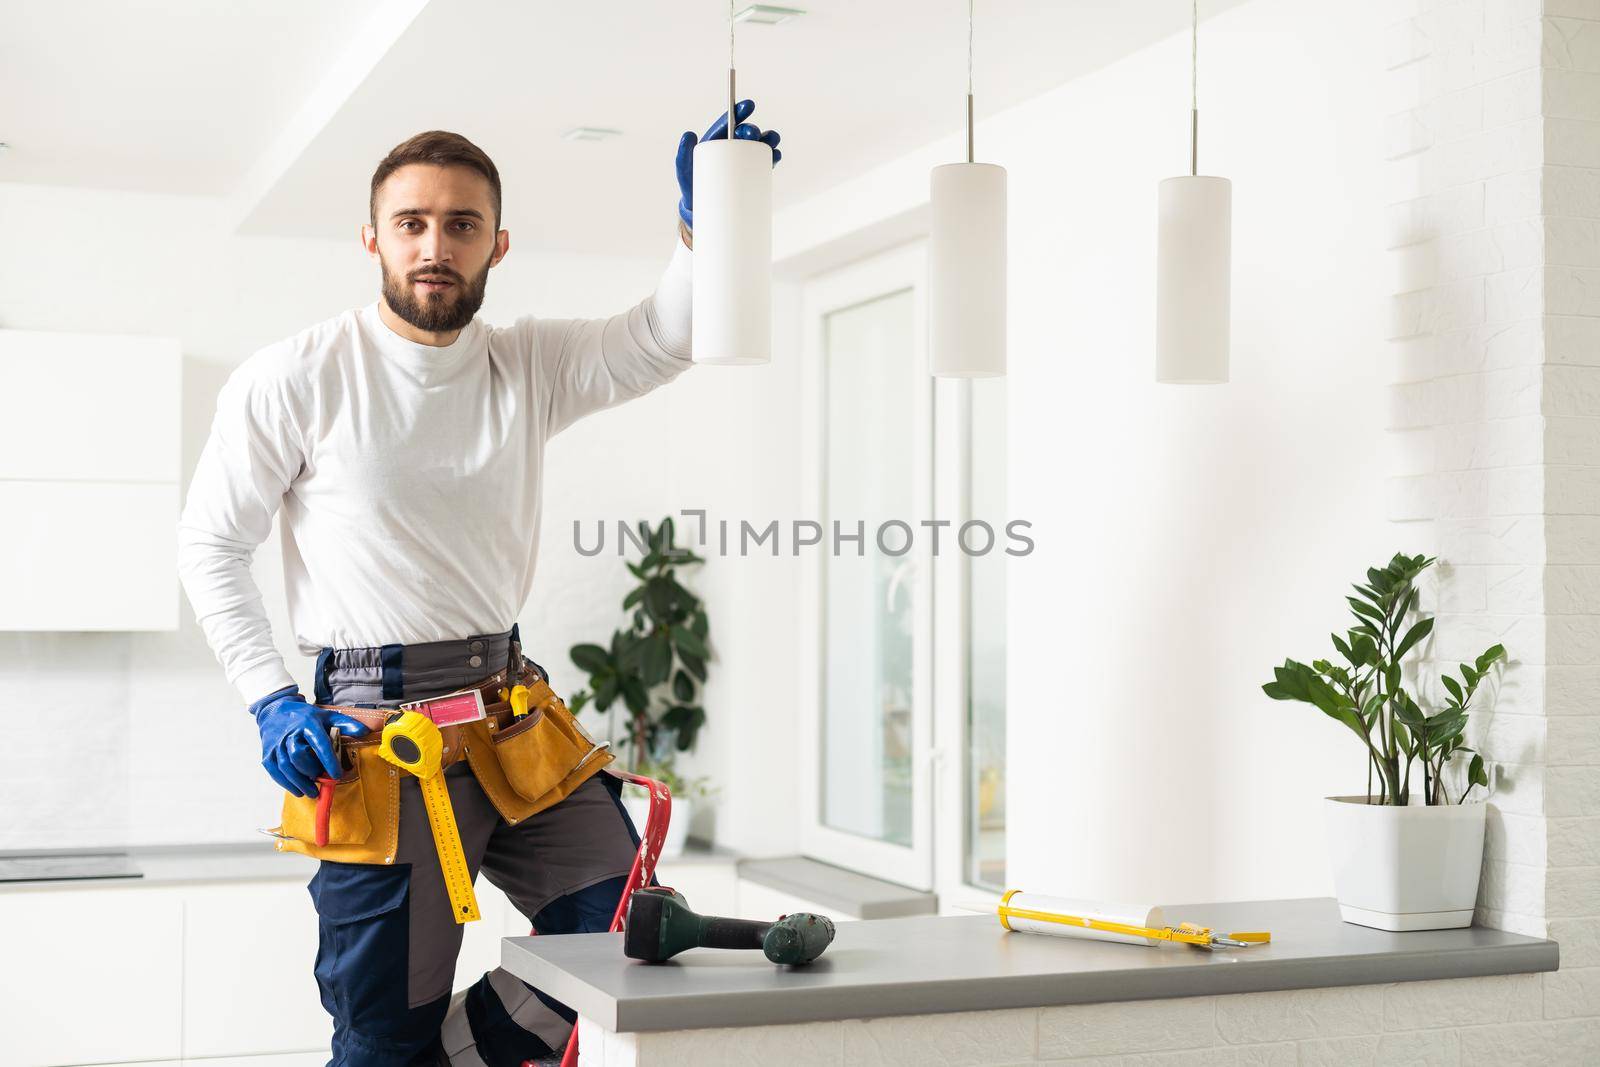 Electrician worker installation electric lamps light inside apartment. Construction decoration concept